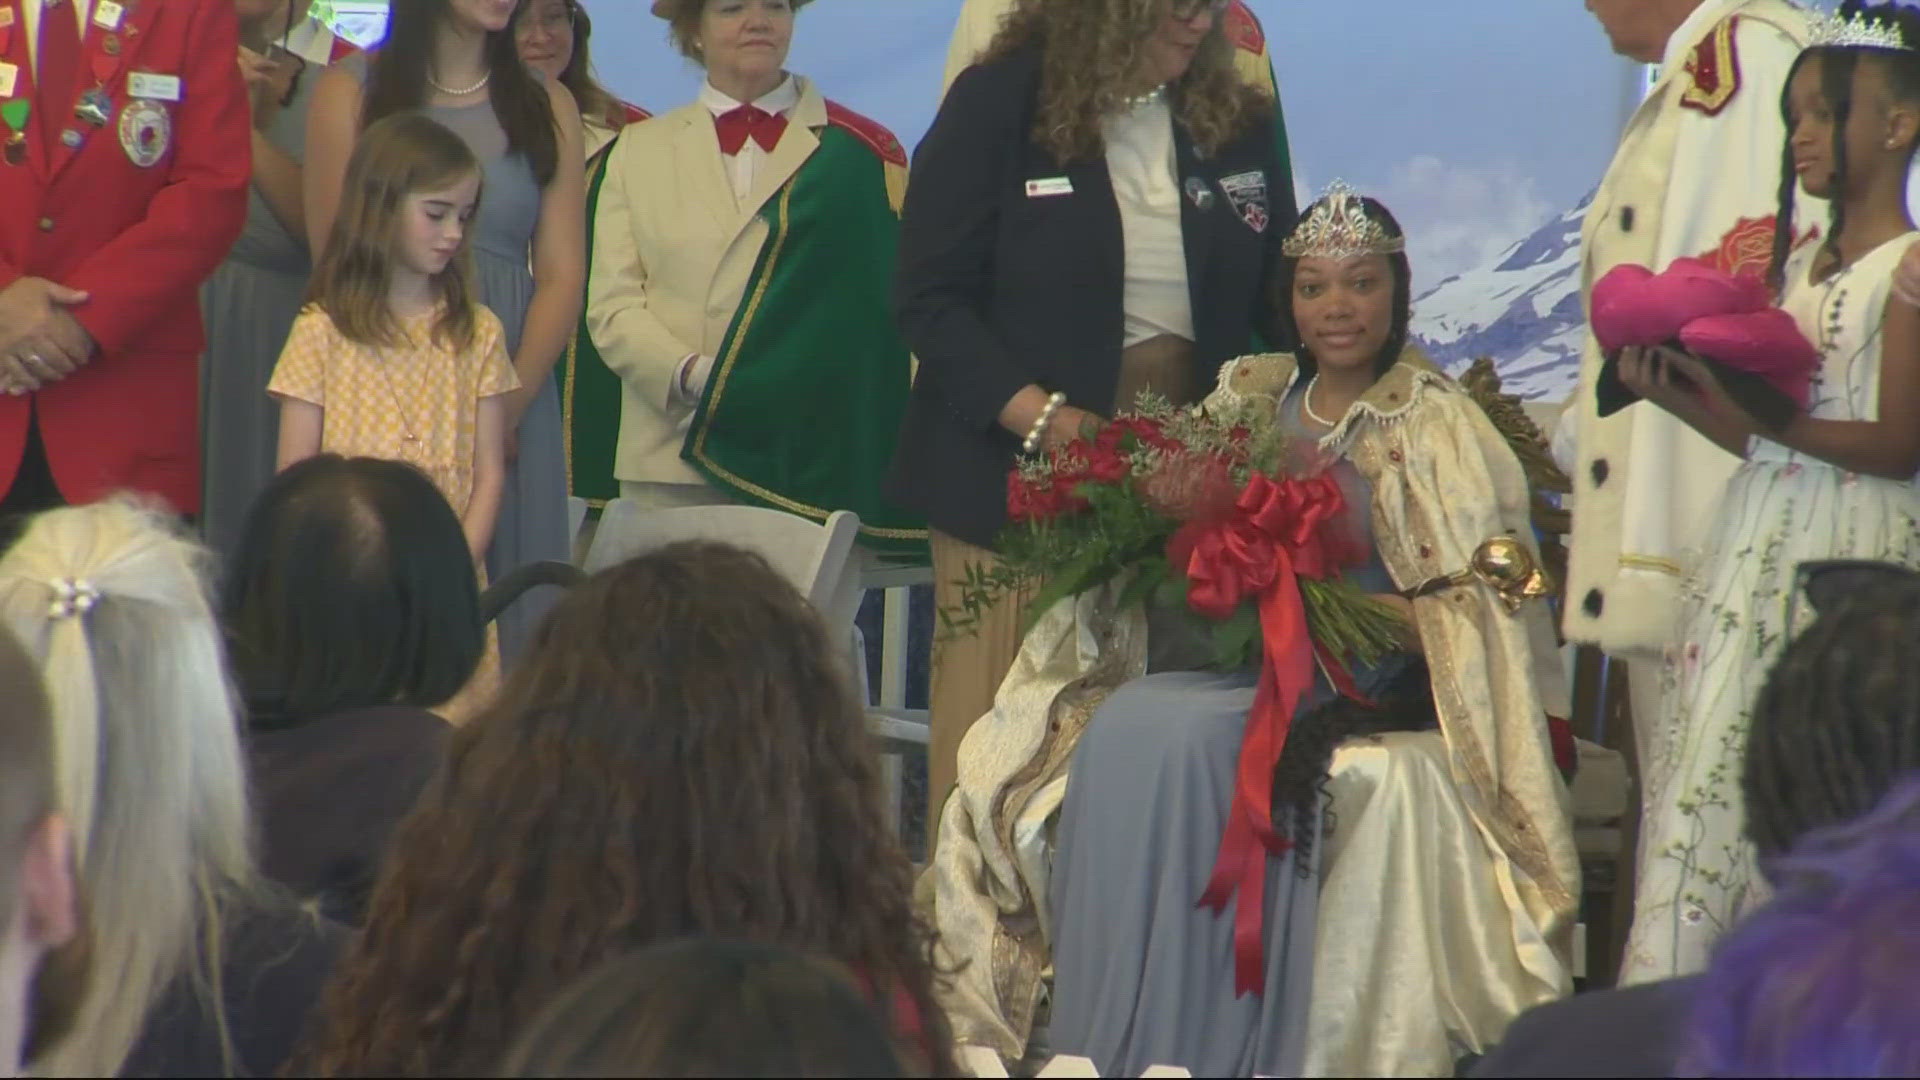 Kobi Flowers, a Jefferson High School senior, has been crowned the 110th Rose Festival Queen.